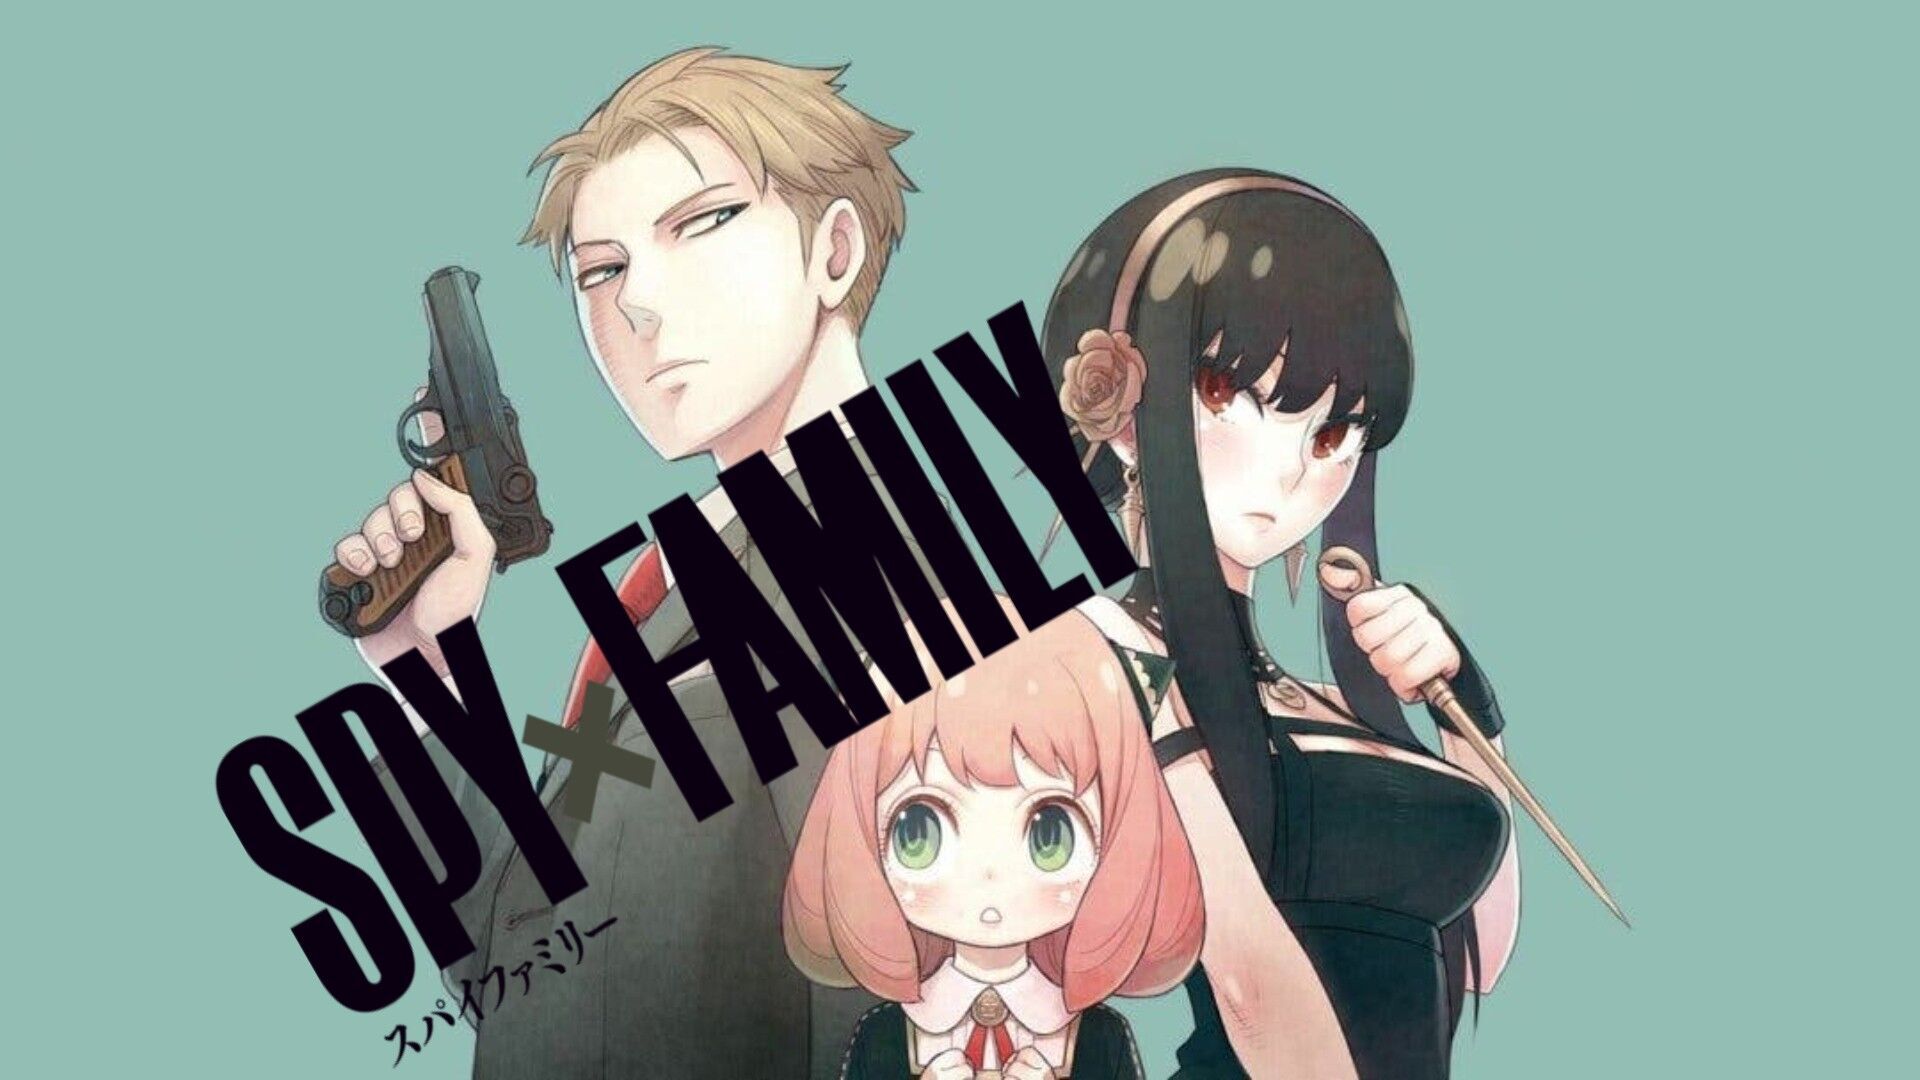 Spy x Family': How the Anime Is Made by Two Studios at Once | The Mary Sue-demhanvico.com.vn